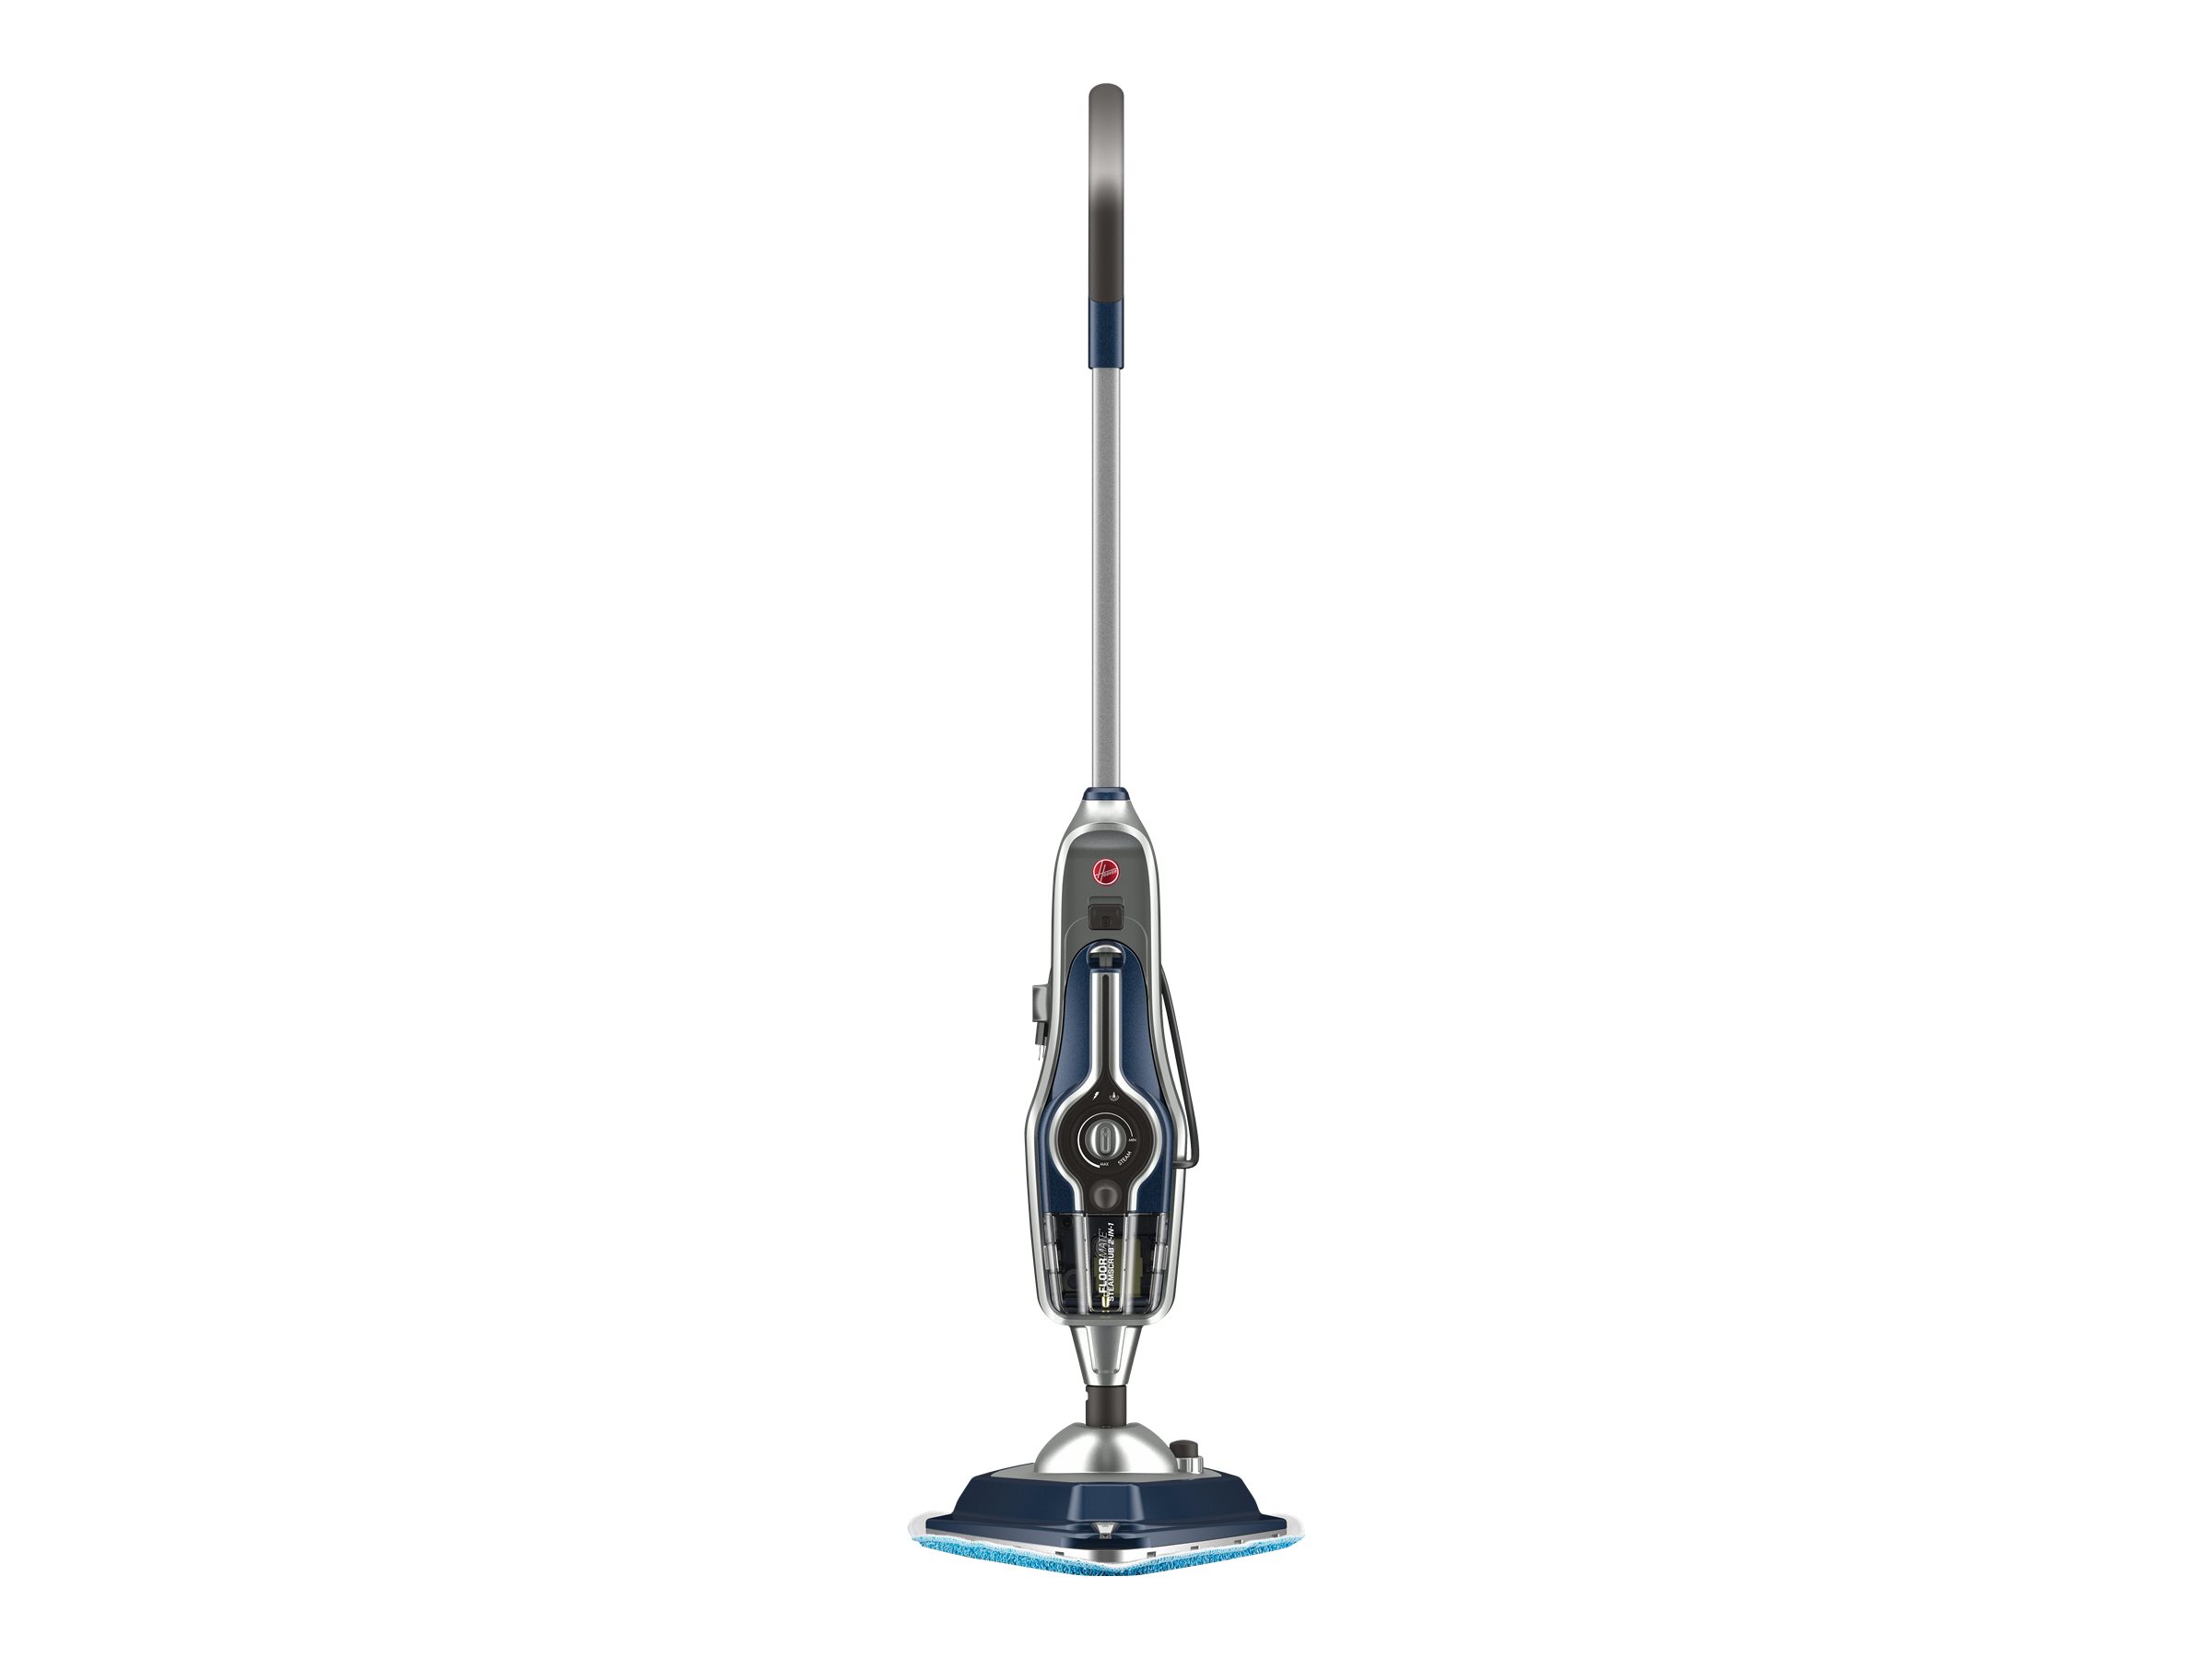 Hoover FloorMate SteamScrub WH20445 2-in-1 - Steam cleaner - stick - image 2 of 8